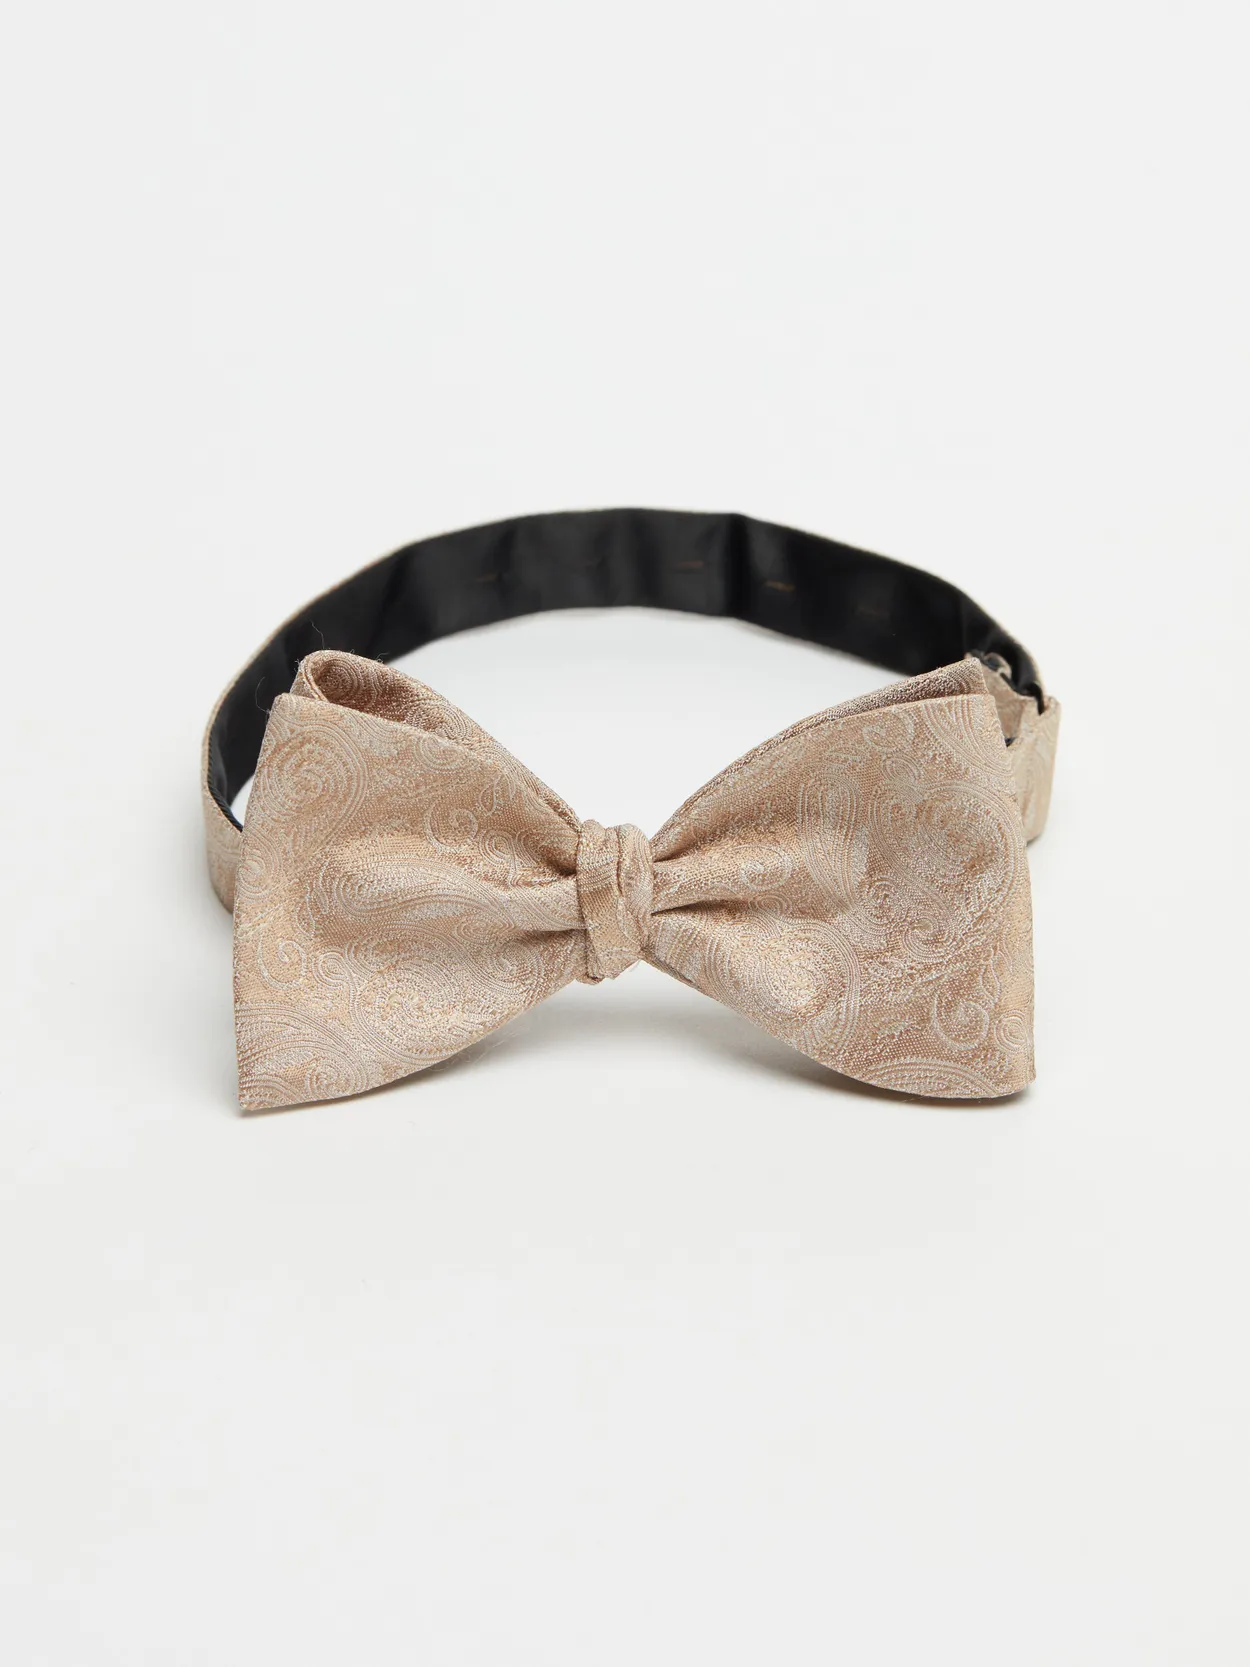 Champagne Bow Tie Formal 